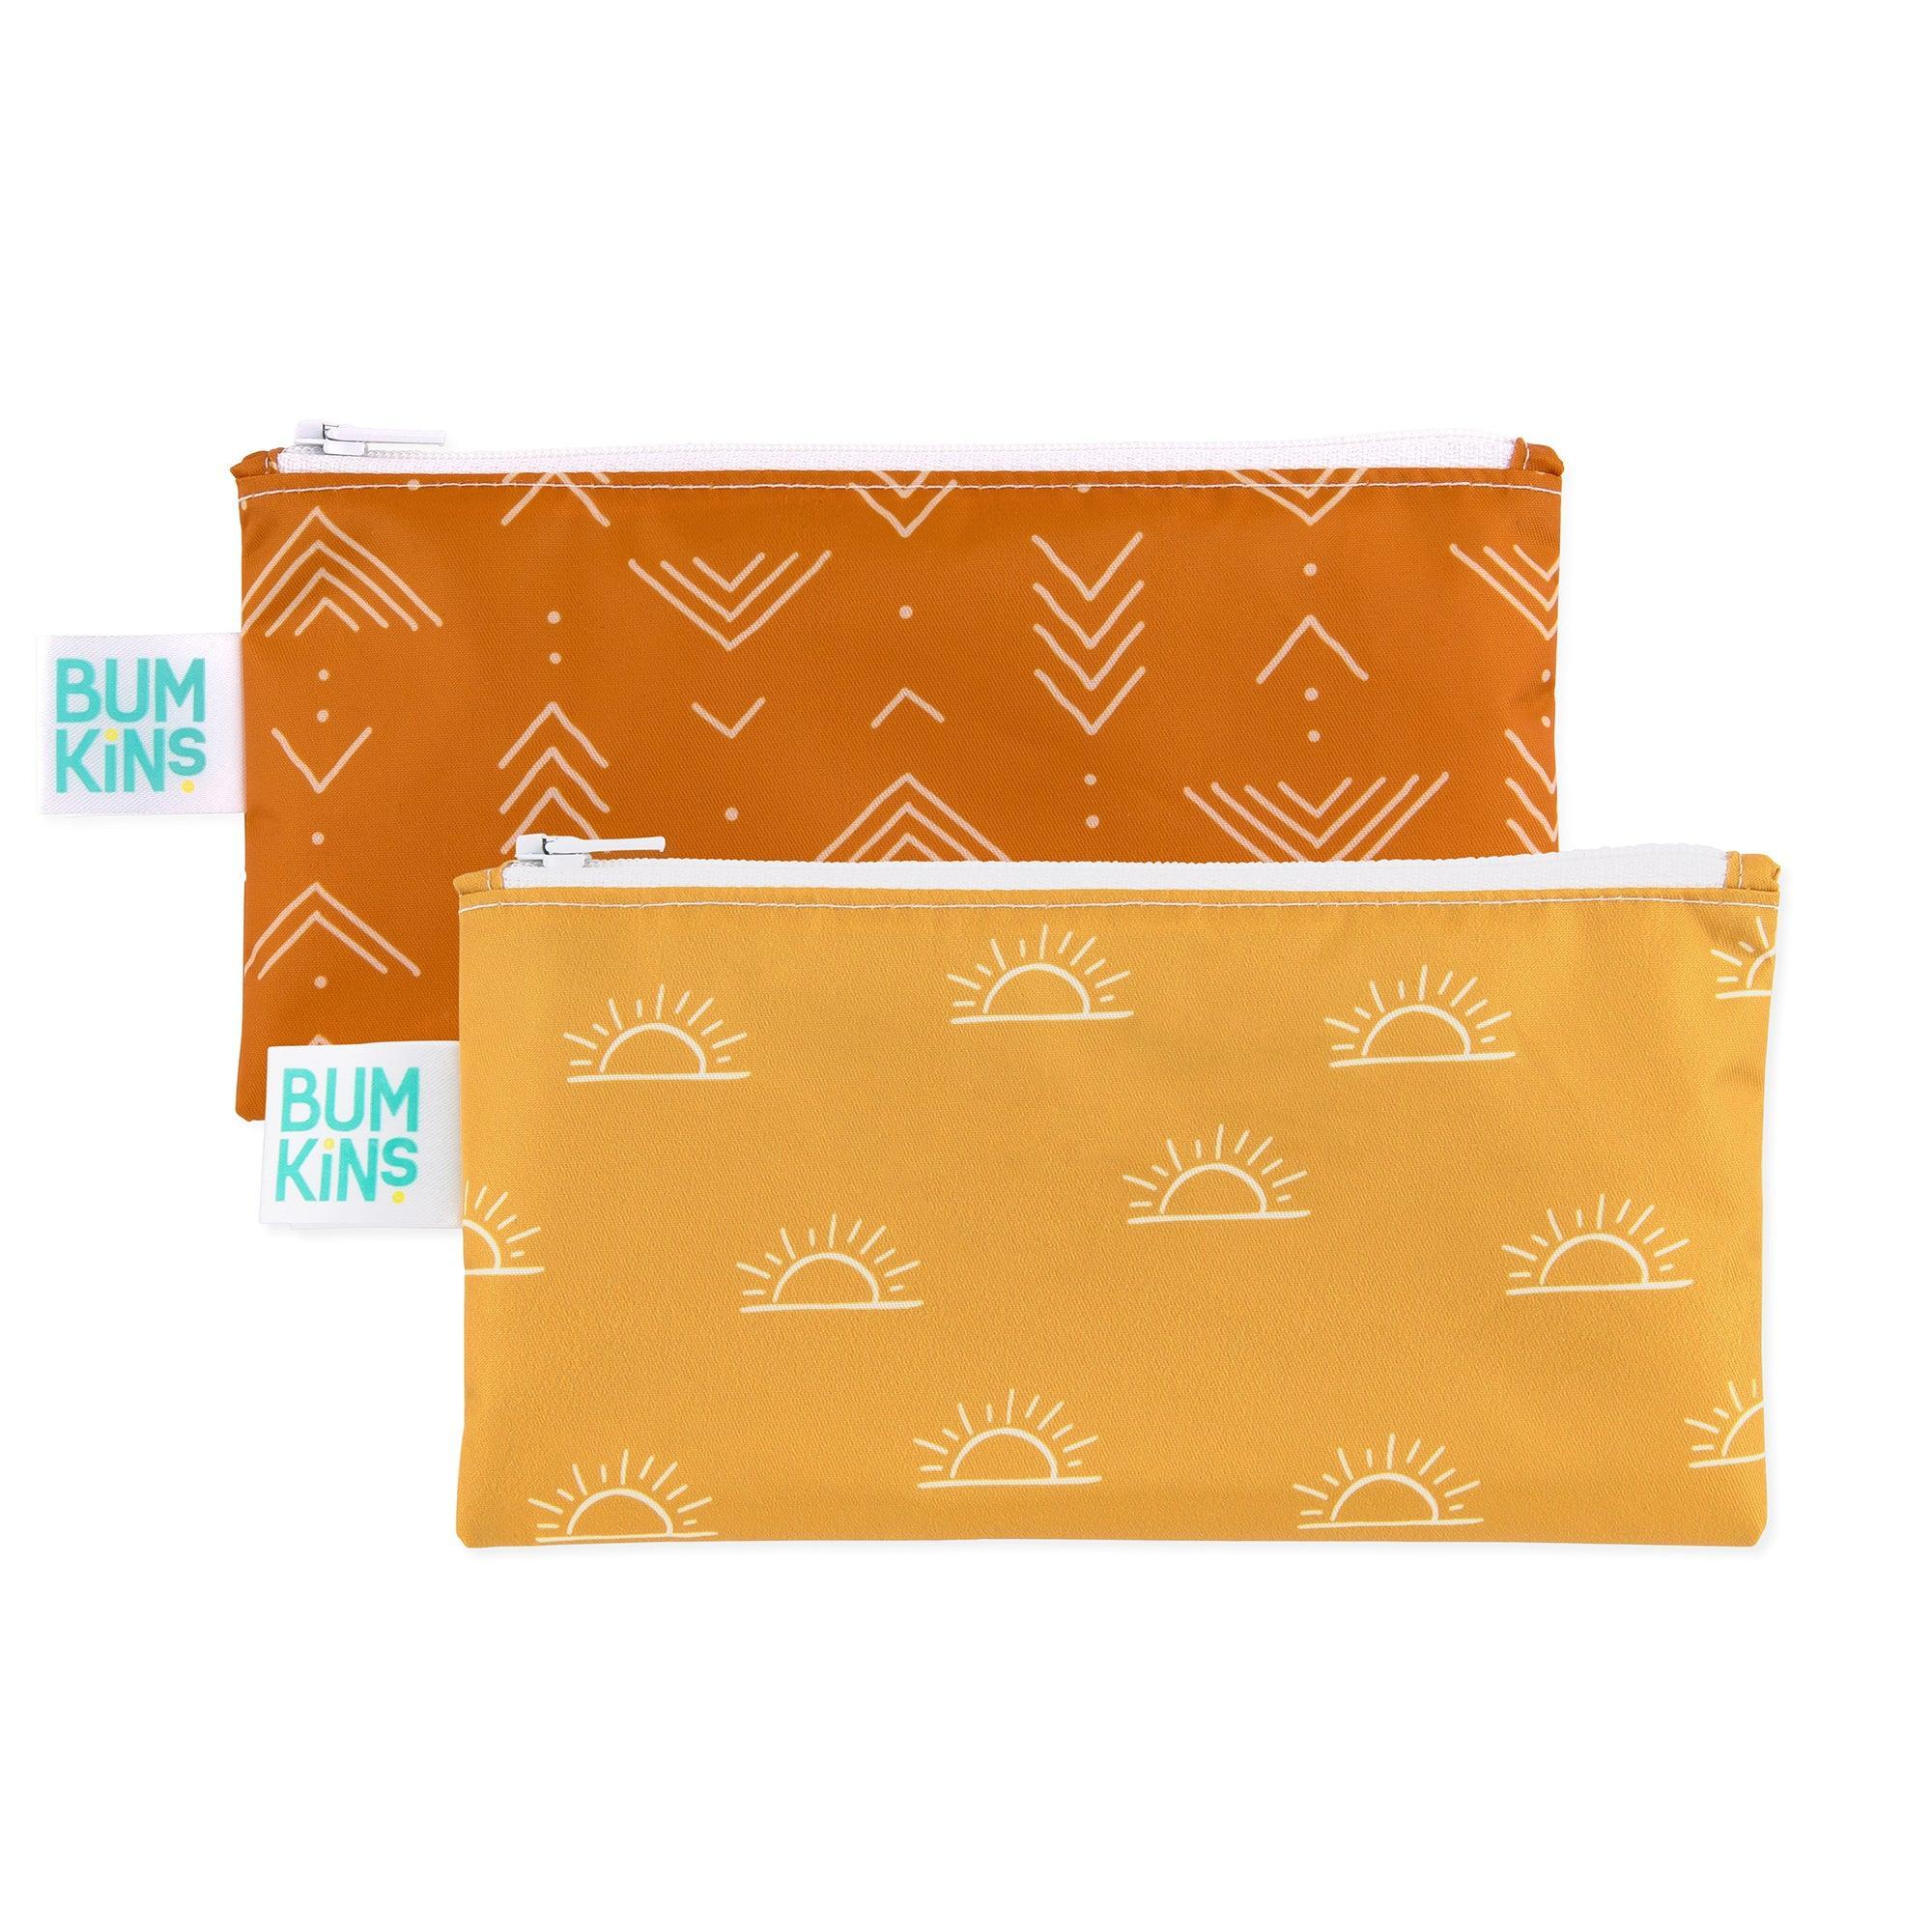 Bumkins Reusable Snack Bags Small Camp Friends & Camp Gear